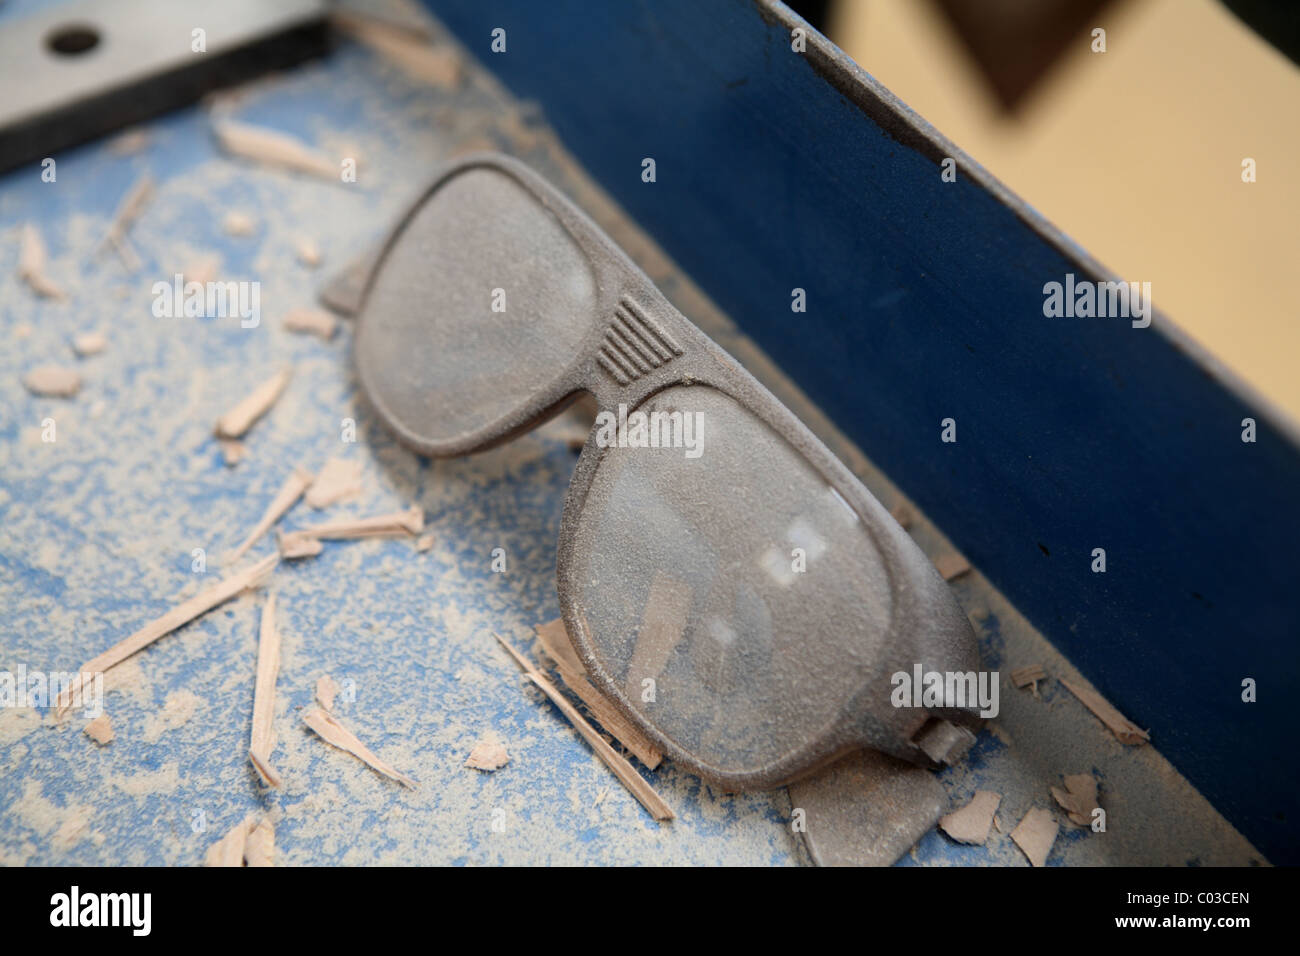 Safety goggles left in dust Stock Photo